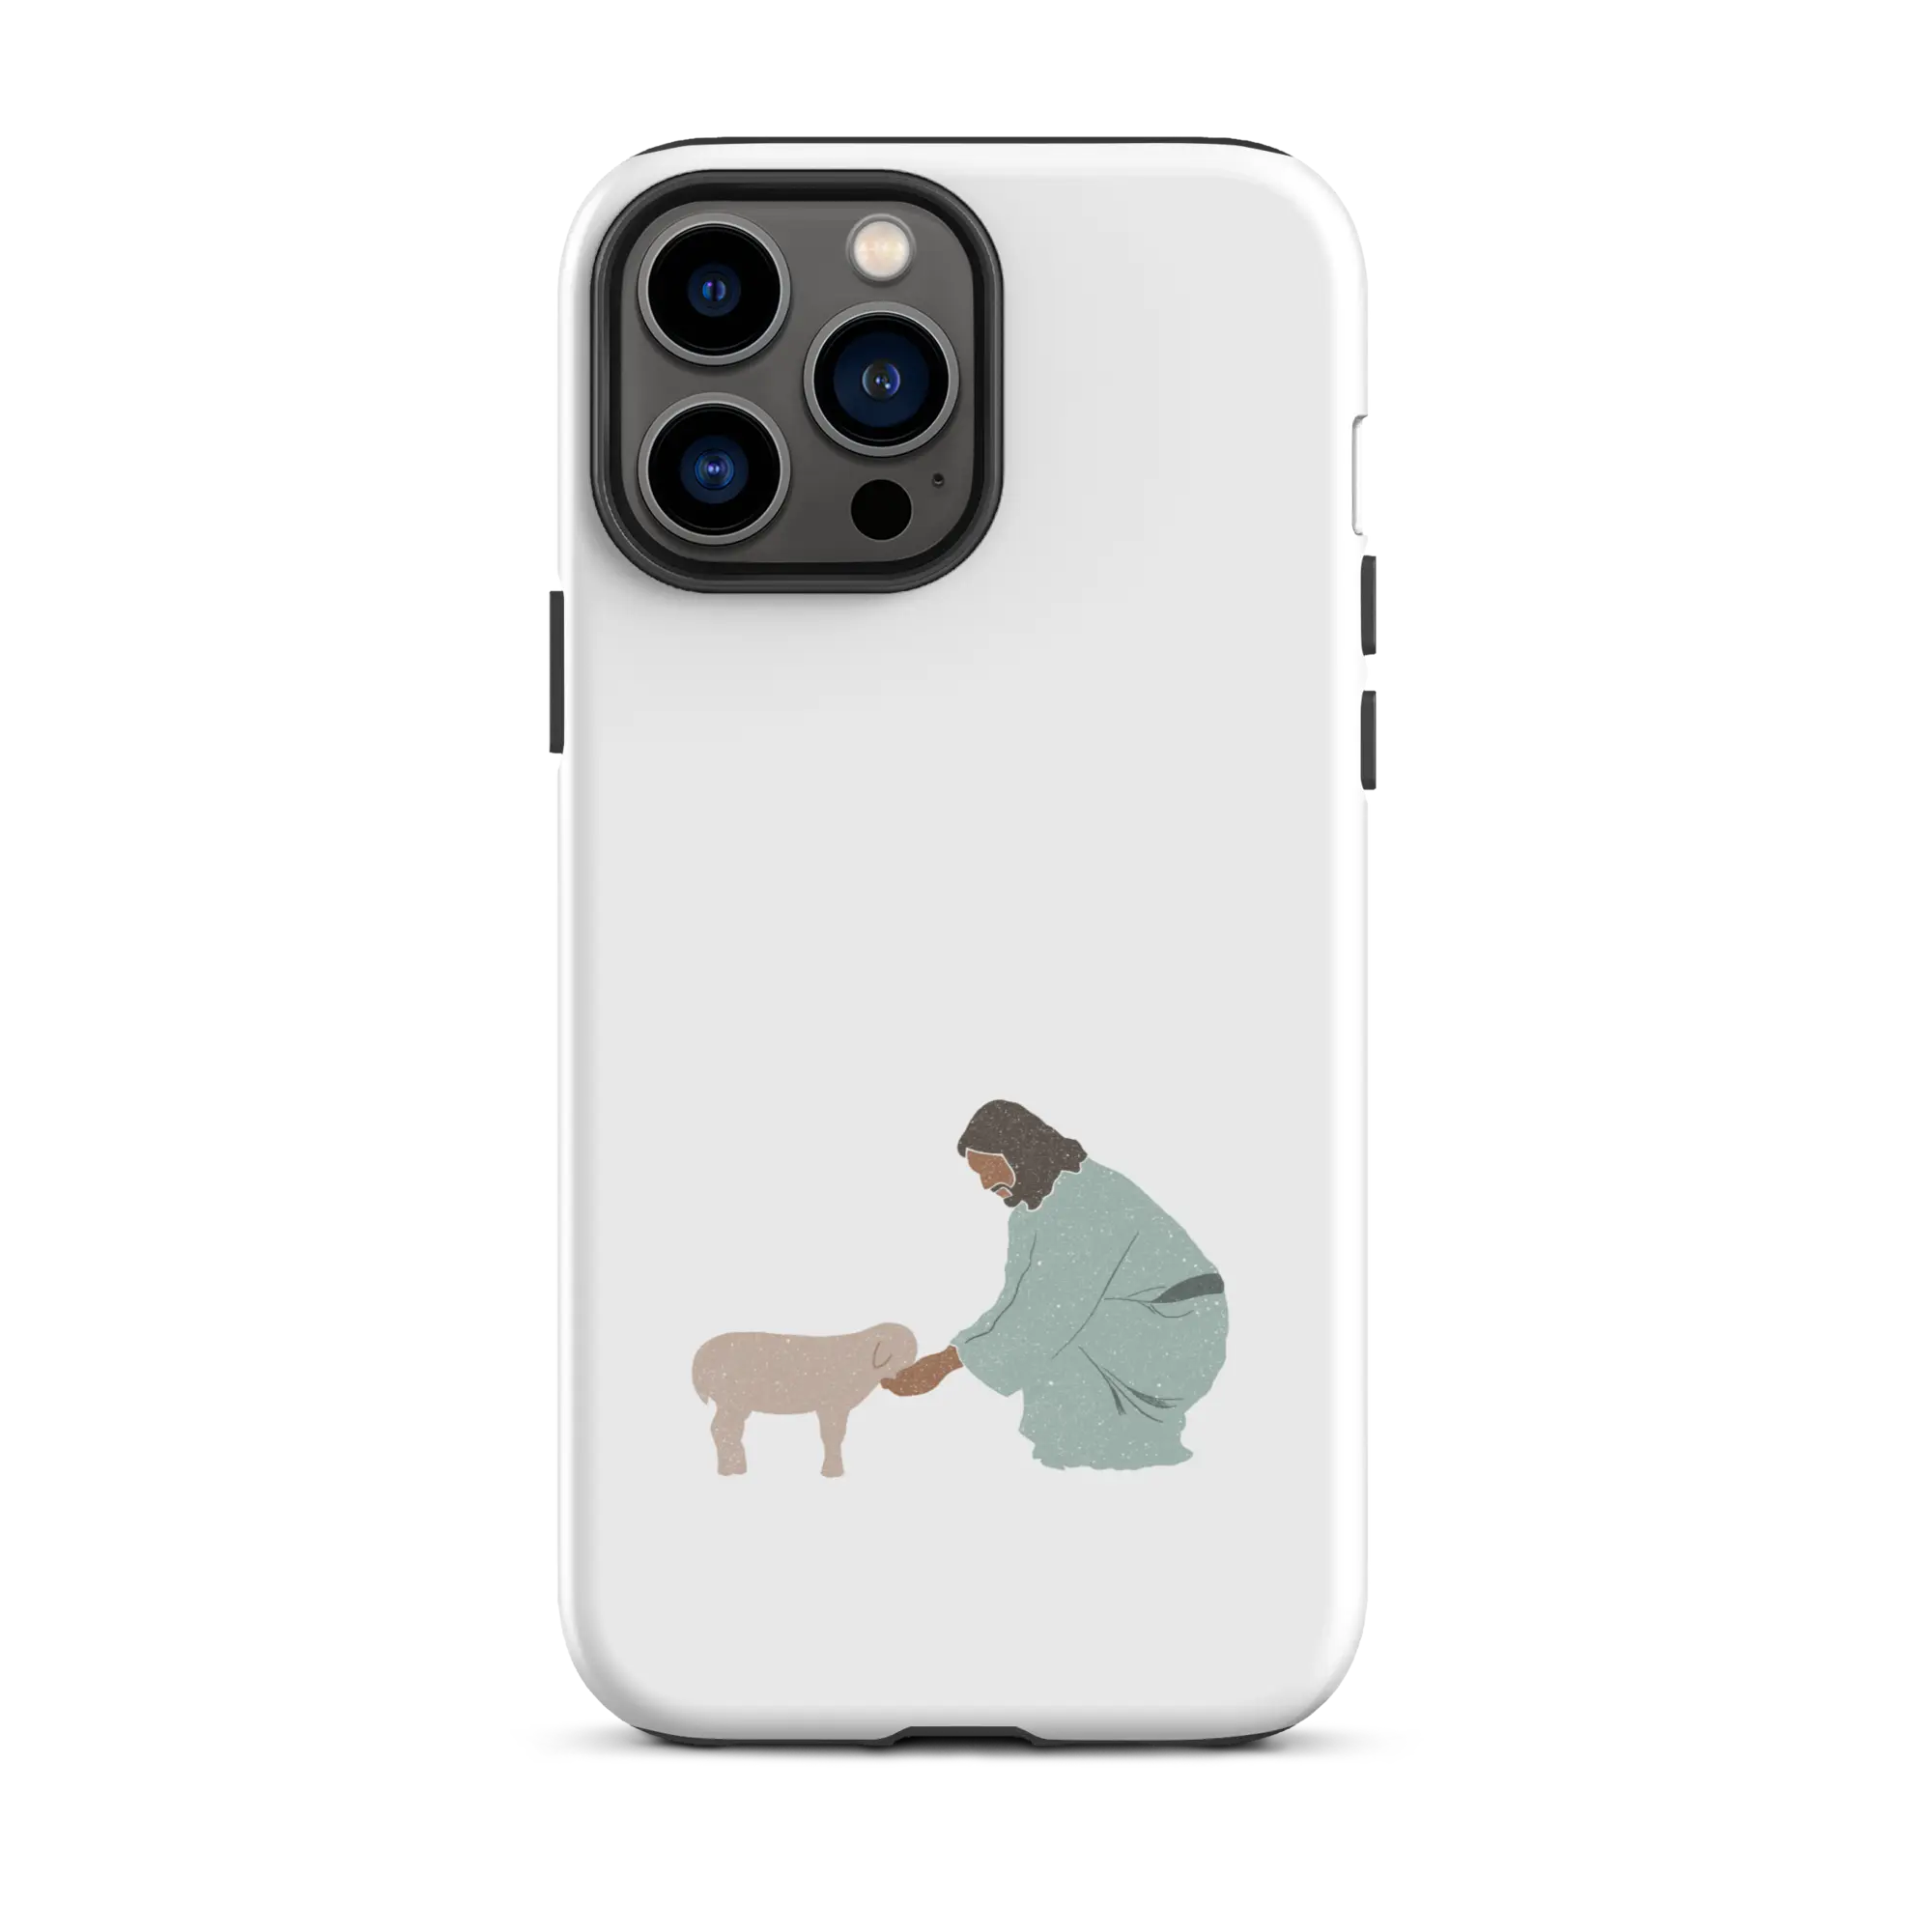 Minimalist white iPhone case with a depiction of Jesus tenderly touching a sheep, symbolizing guidance and care